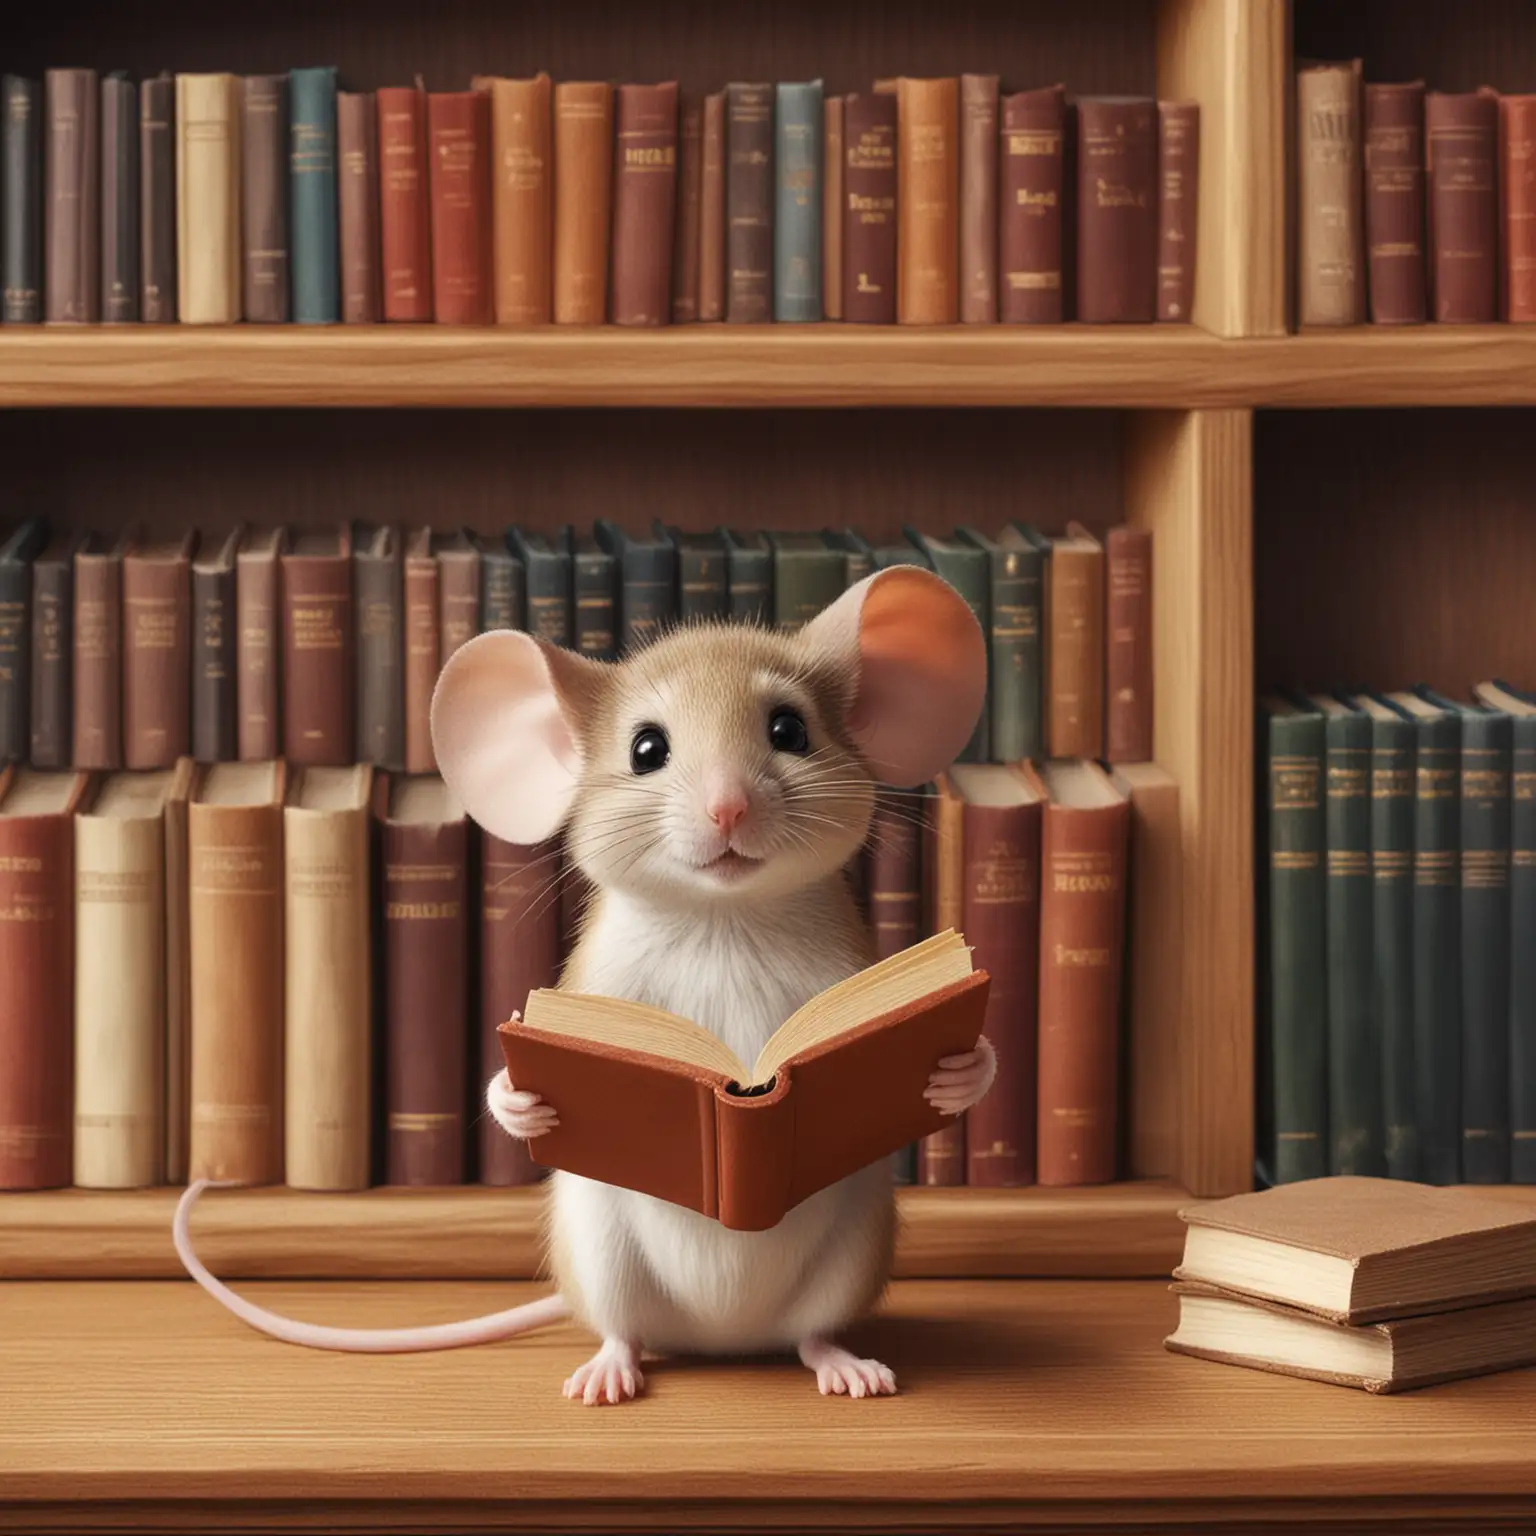 Curious Mouse Reading Books on Shelf